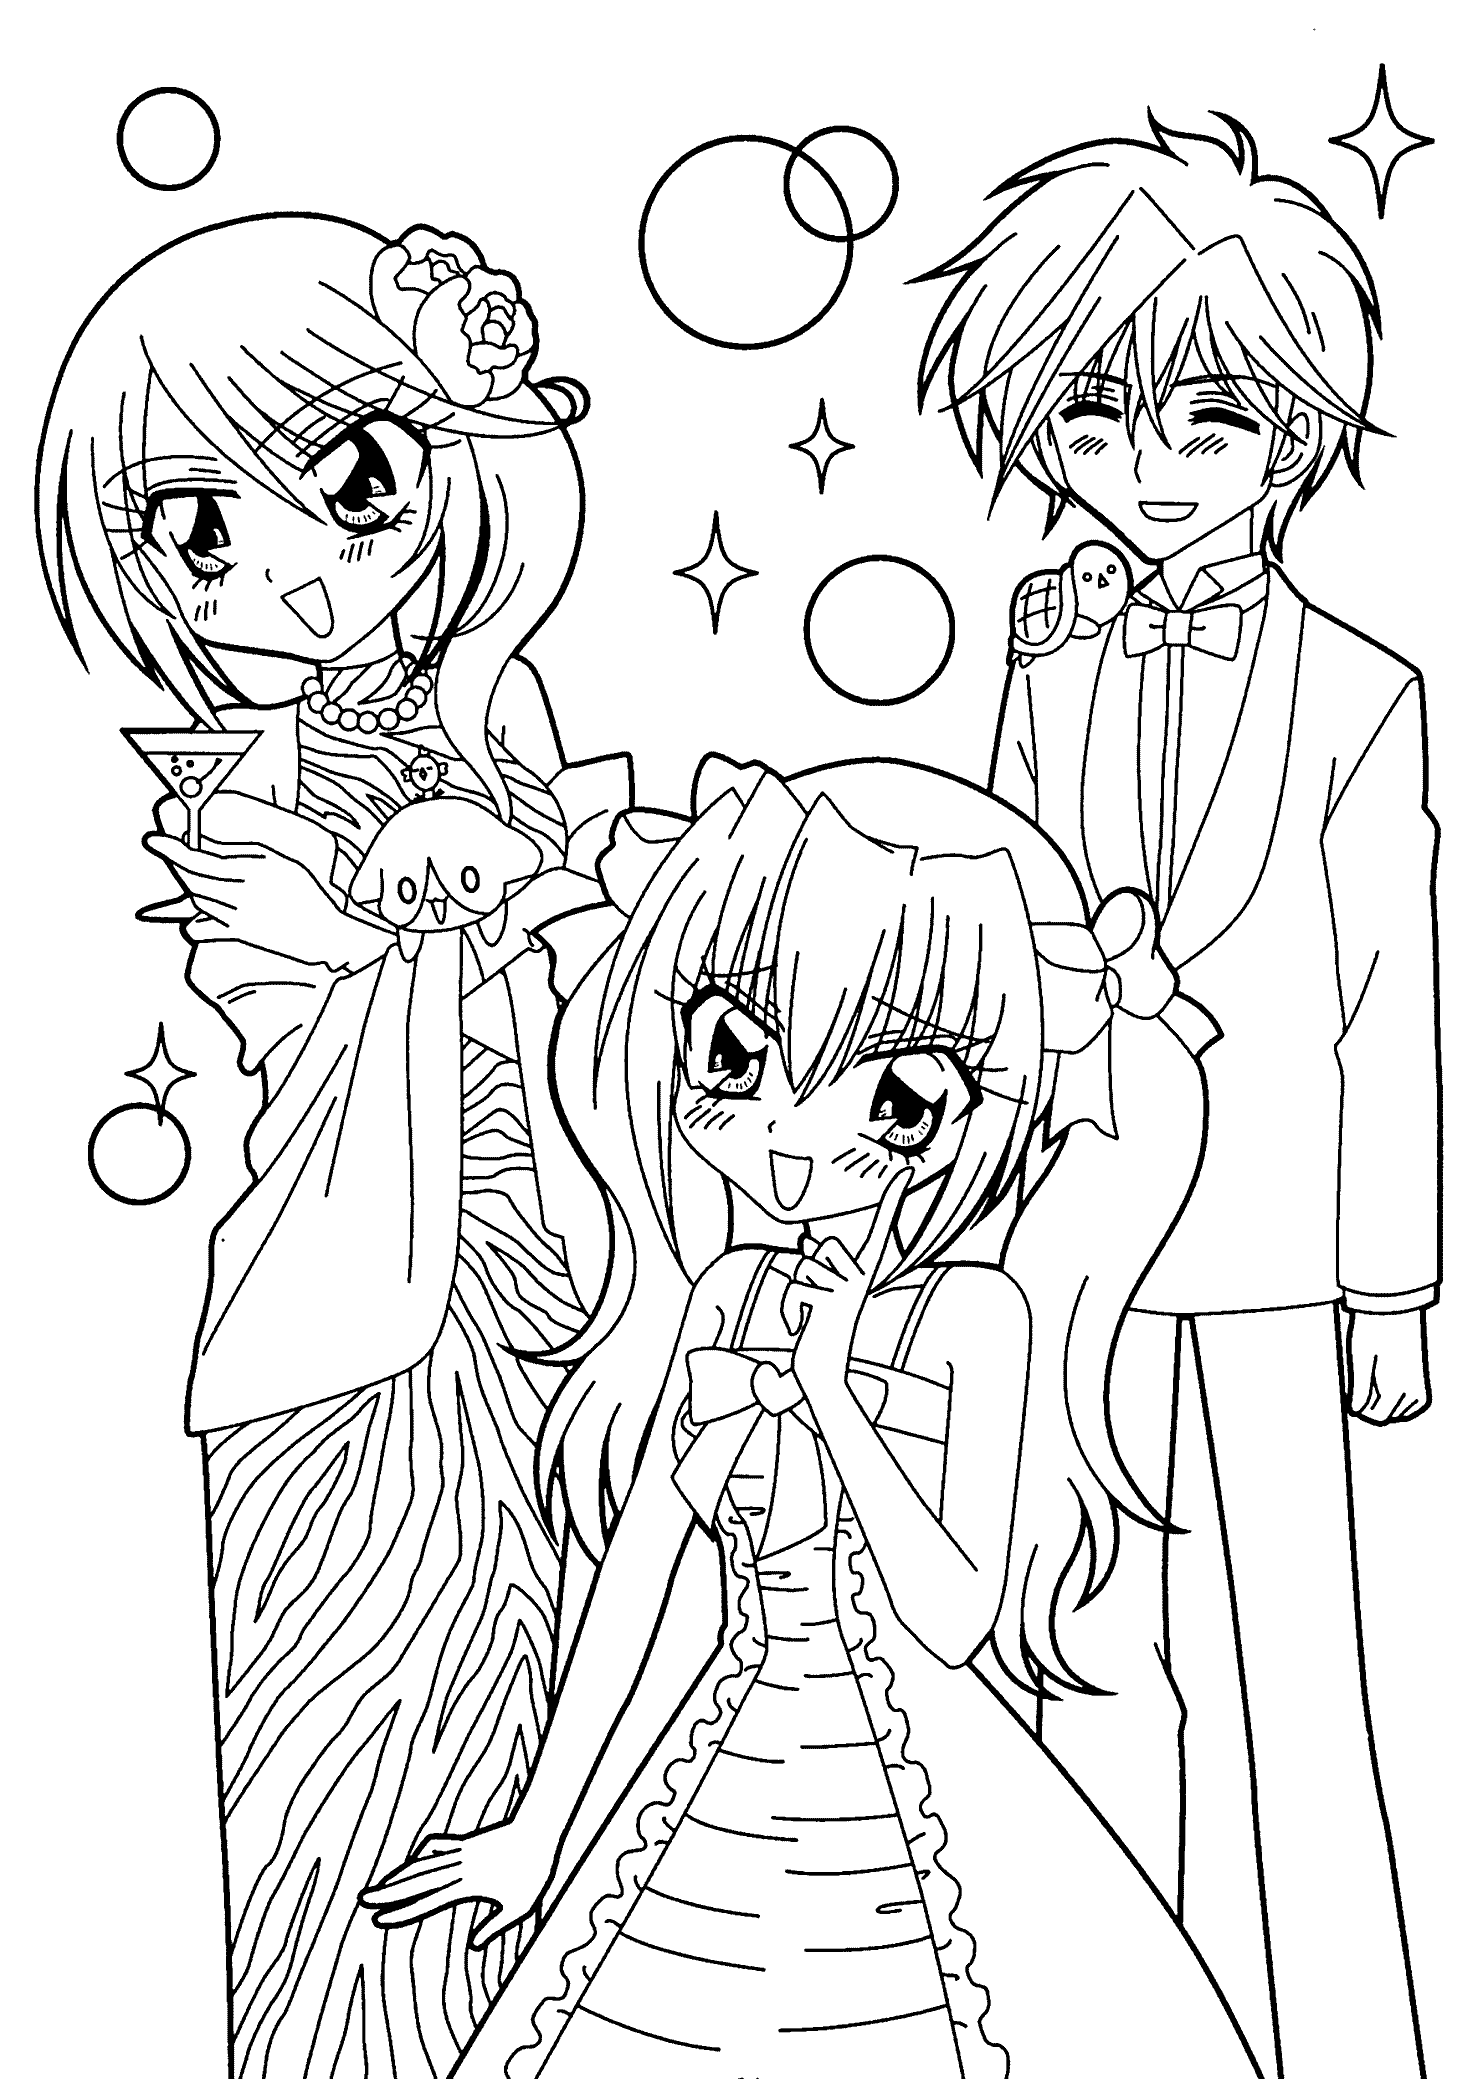 Anime Houses Coloring Pages - Coloring Pages For All Ages